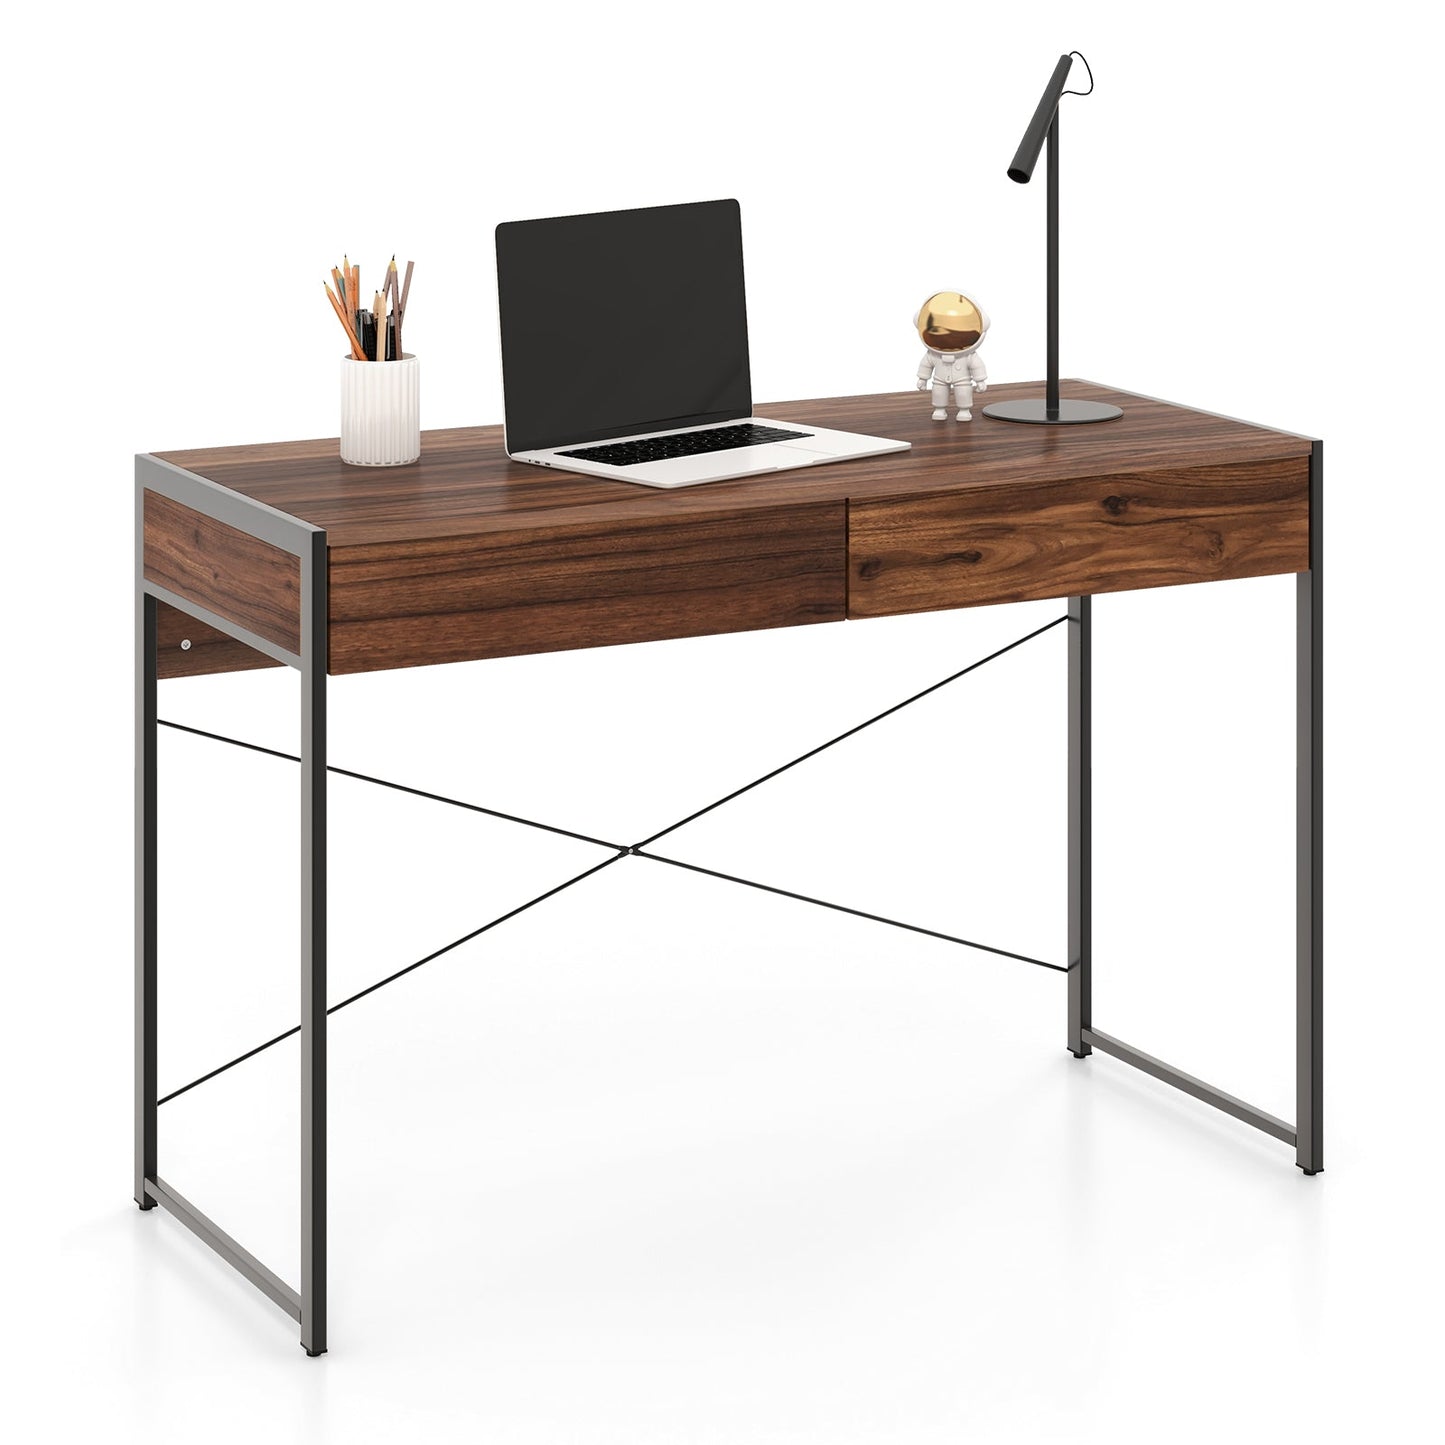 Wooden Study Computer Desk with 2 Drawers, 112 x 48 x 76cm -Brown